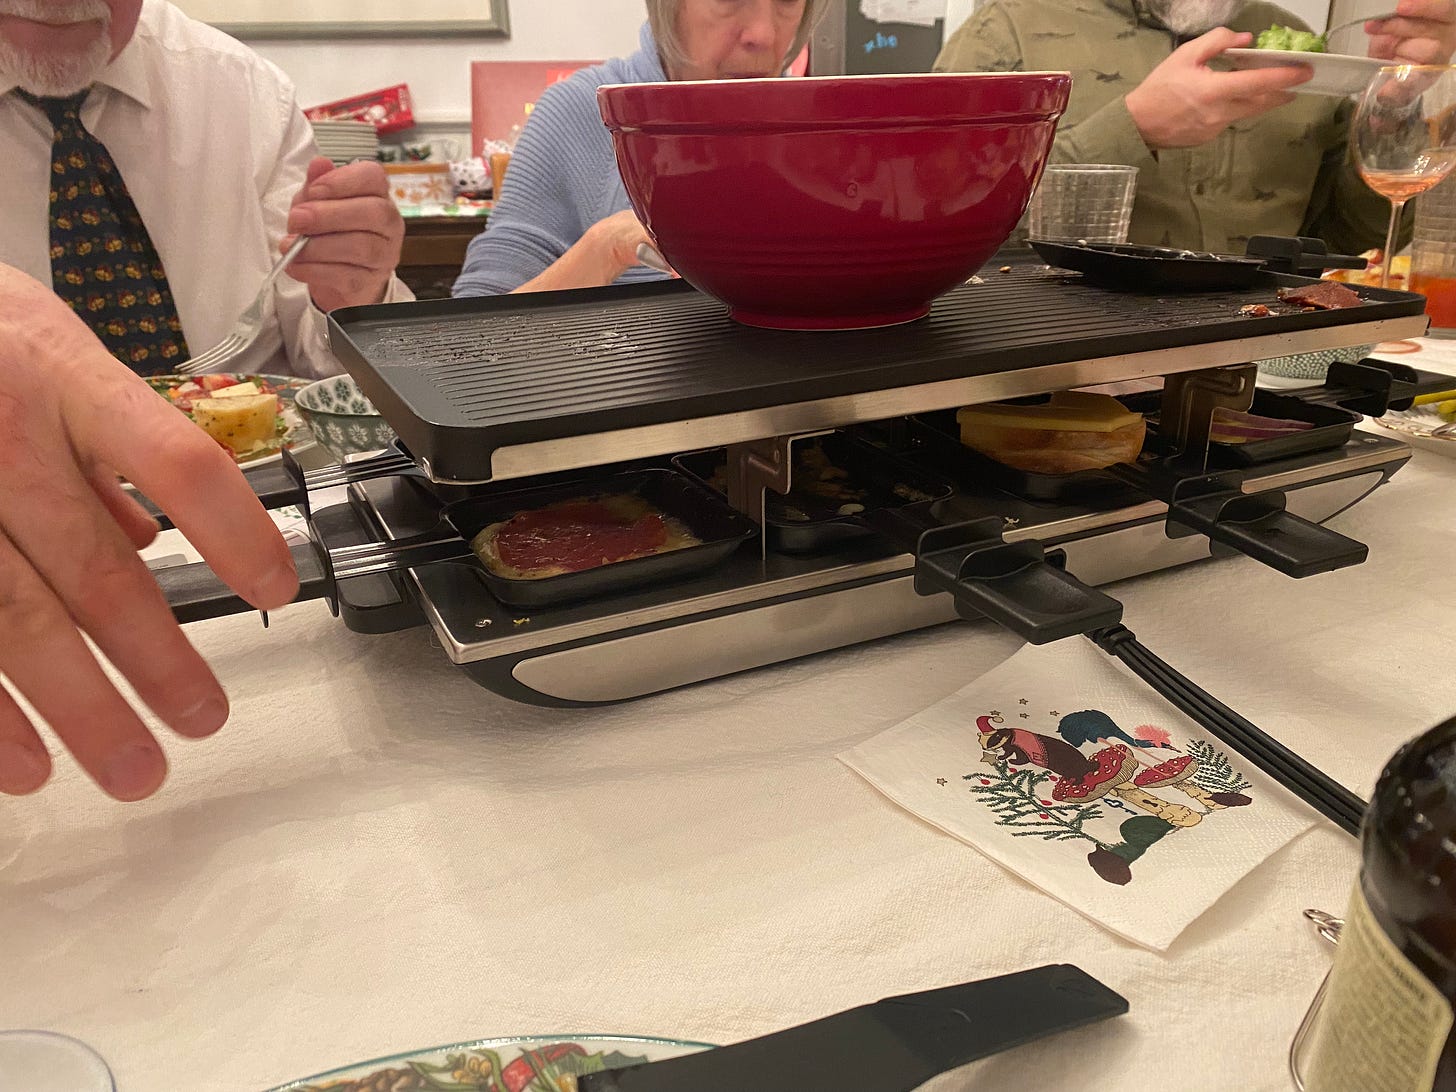 A rectangular raclette set with the paddles in use, a red bowl (of potatoes) warming on top. People are eating on the opposite side of the table. In the foreground a hand reaches toward the set, and a paper napkin with a badger in a Santa hat printed on it sits on the table.